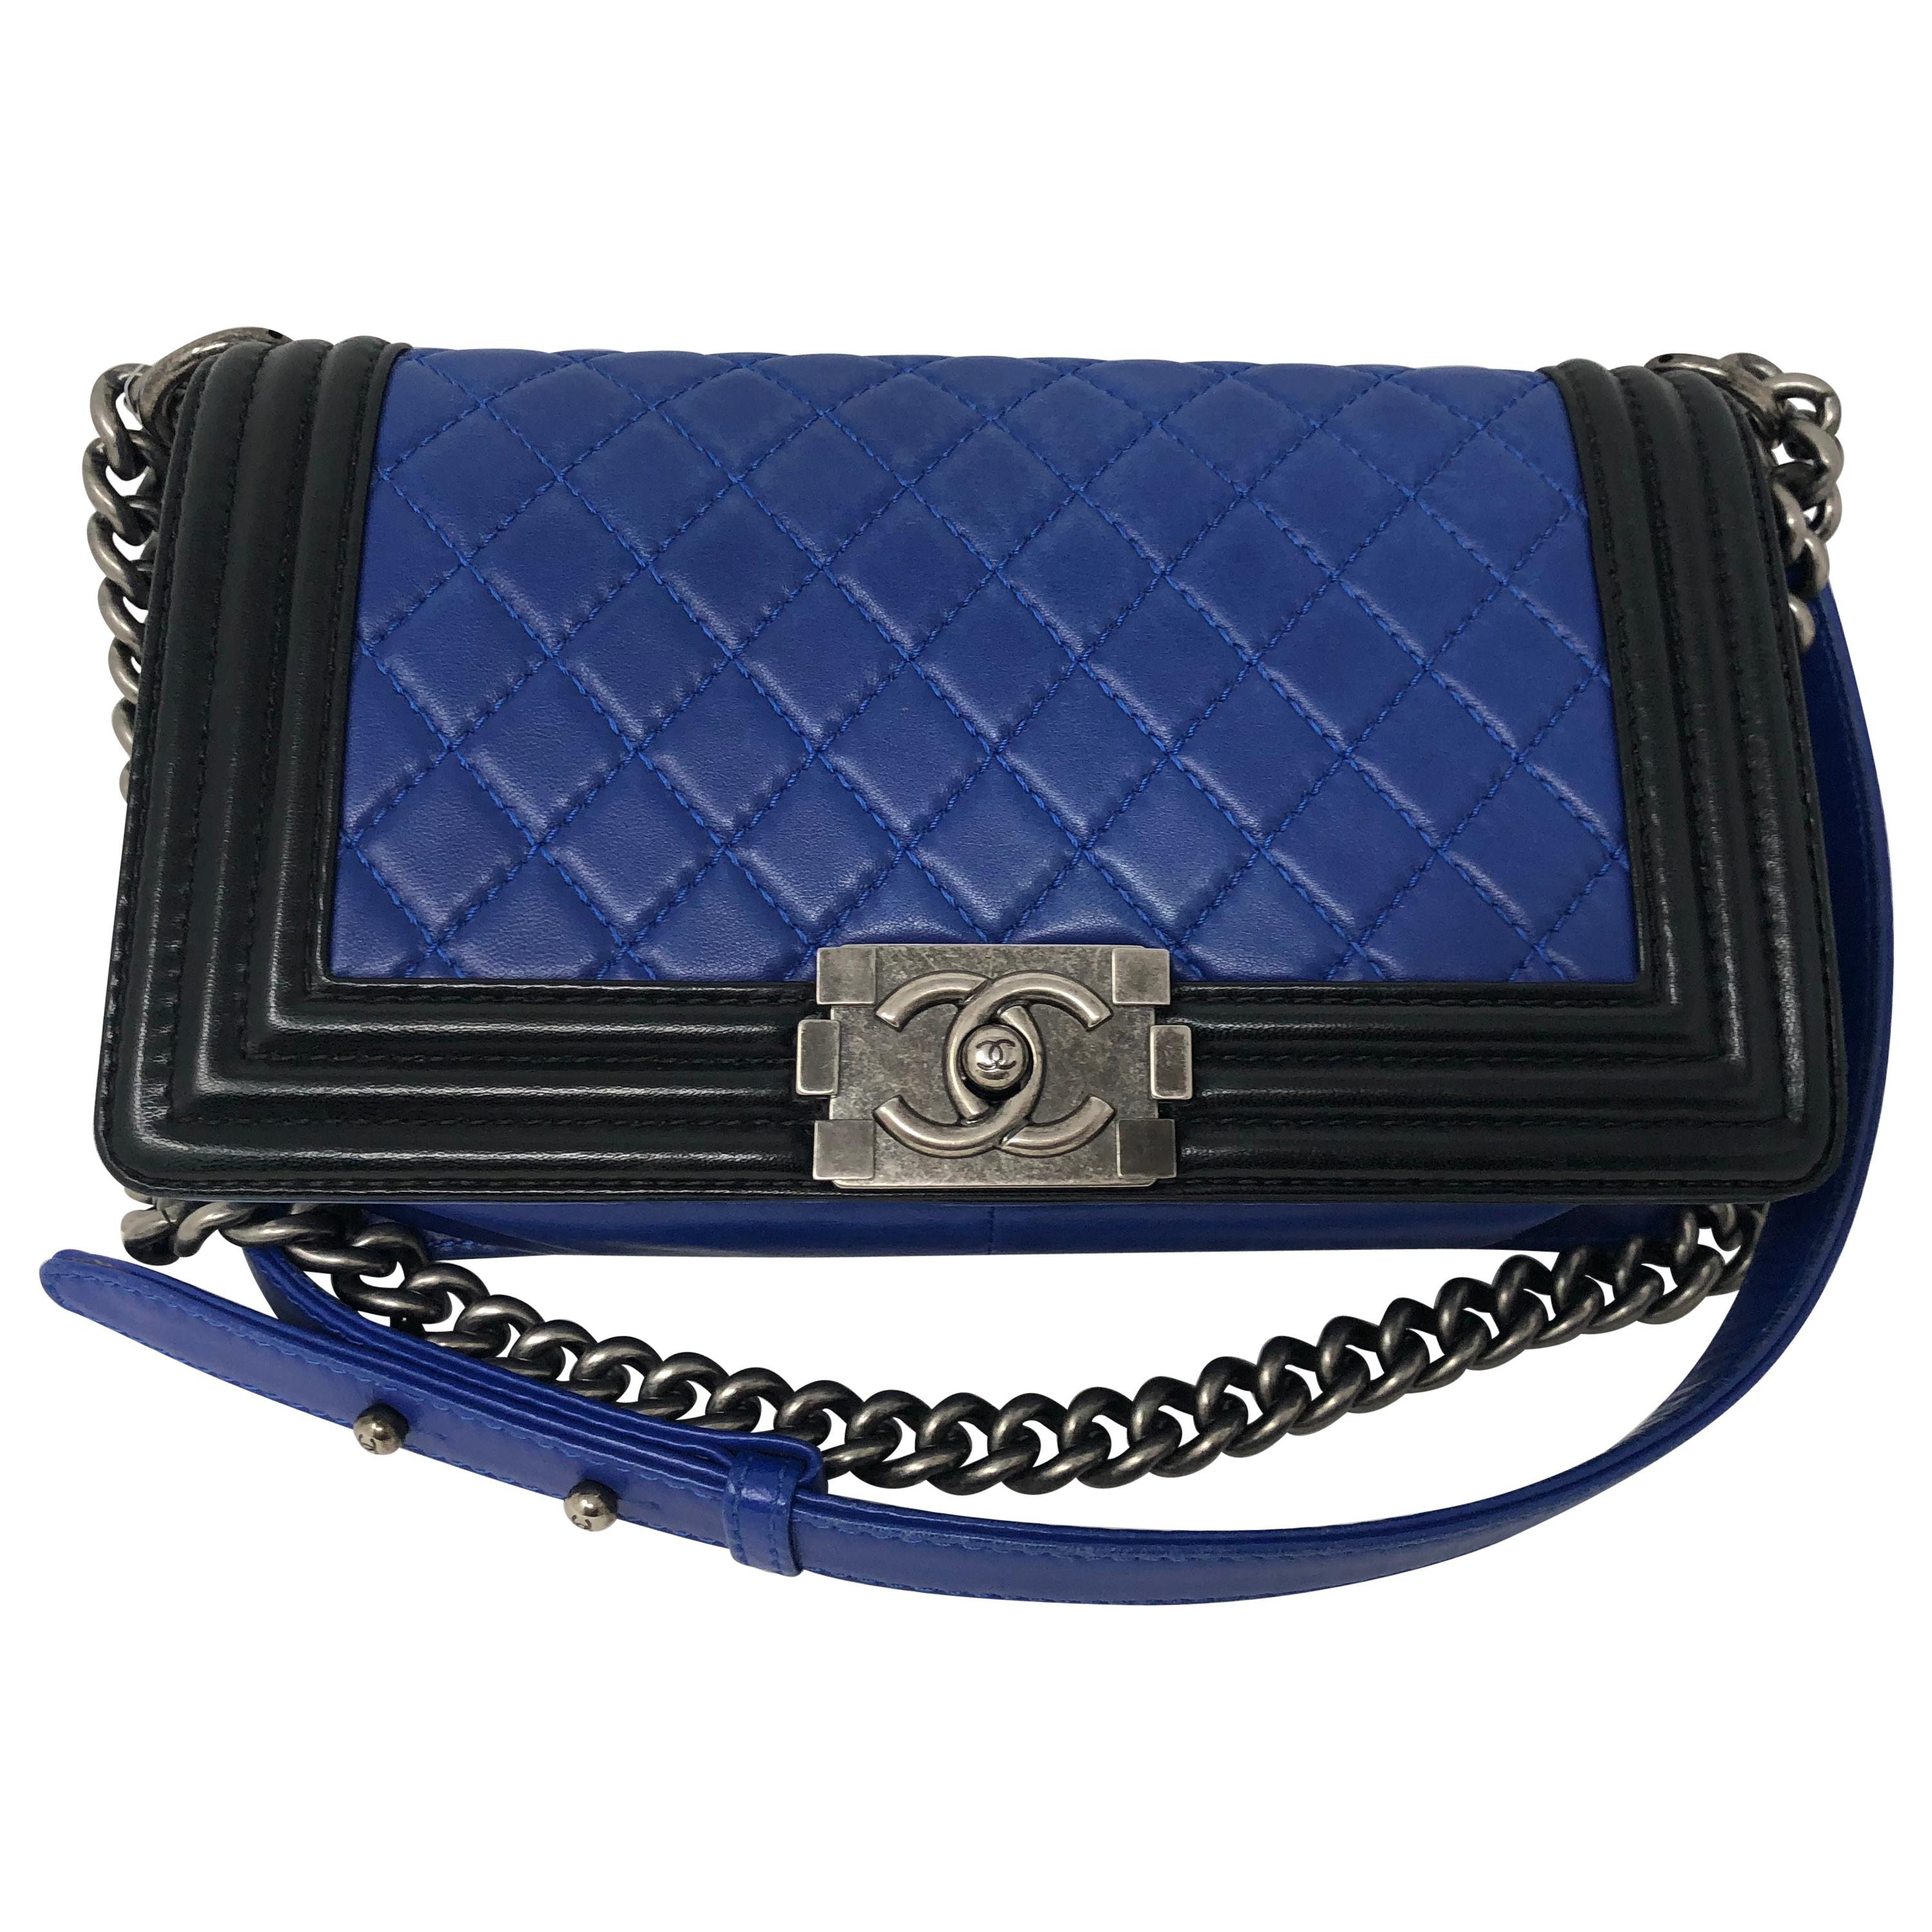 CHANEL, LIGHT BLUE BOY GM BAG IN GRAINED LEATHER, 2011/2012, Handbags and  Accessories, 2020